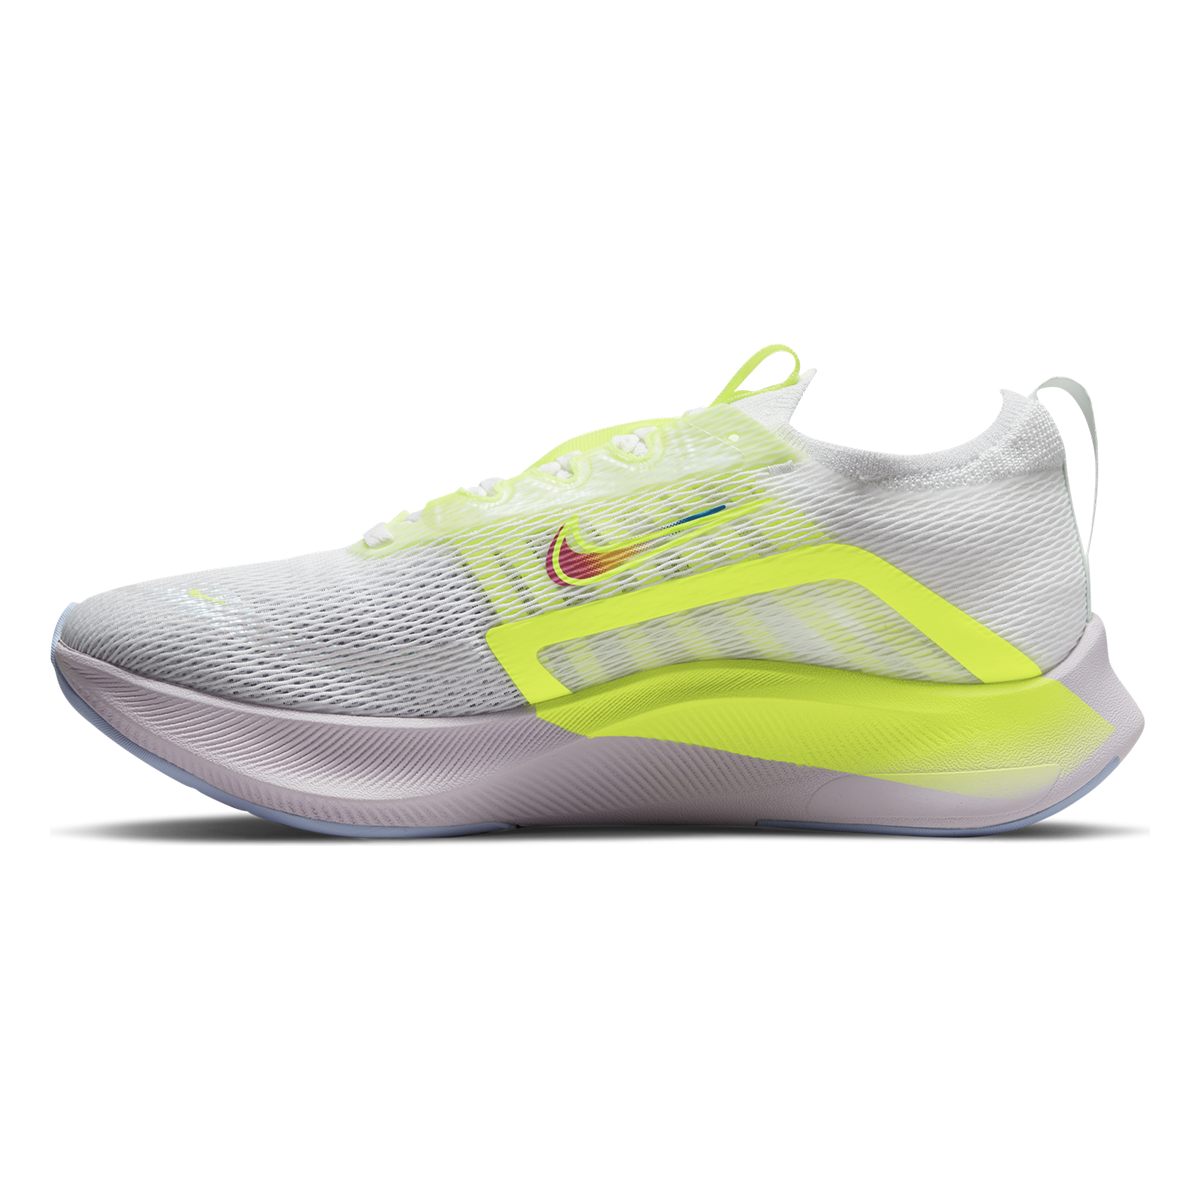 Nike Zoom Fly 4 Premium, , large image number null